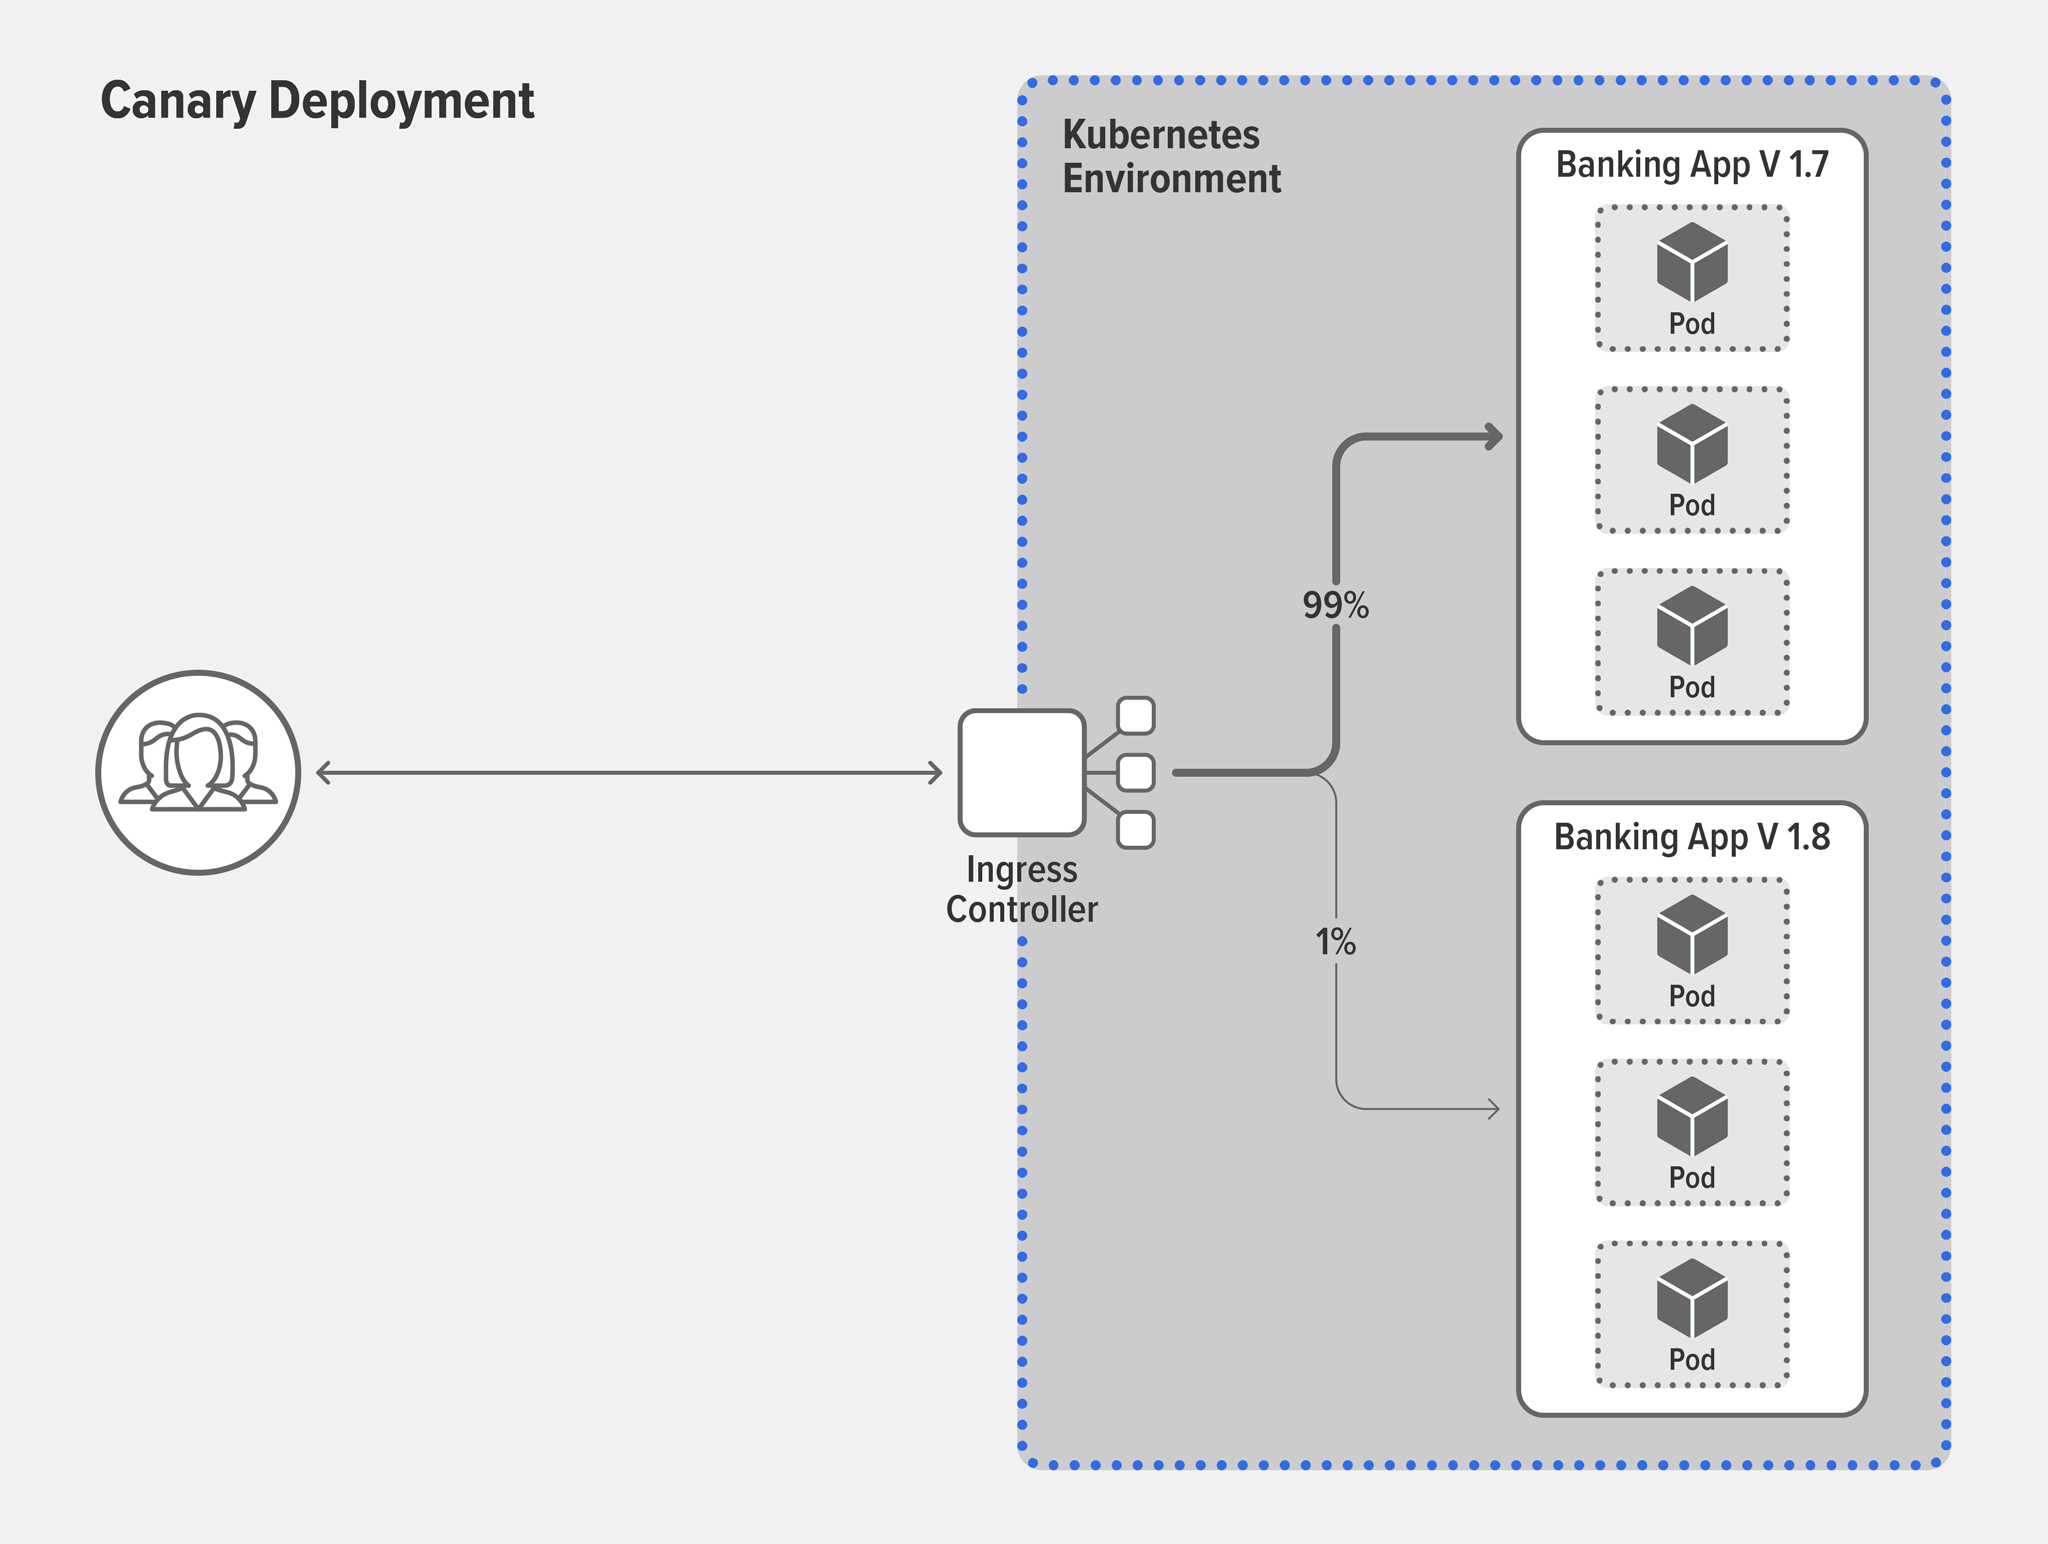 Topology diagram of canary deployment using an Ingress controller to split traffic